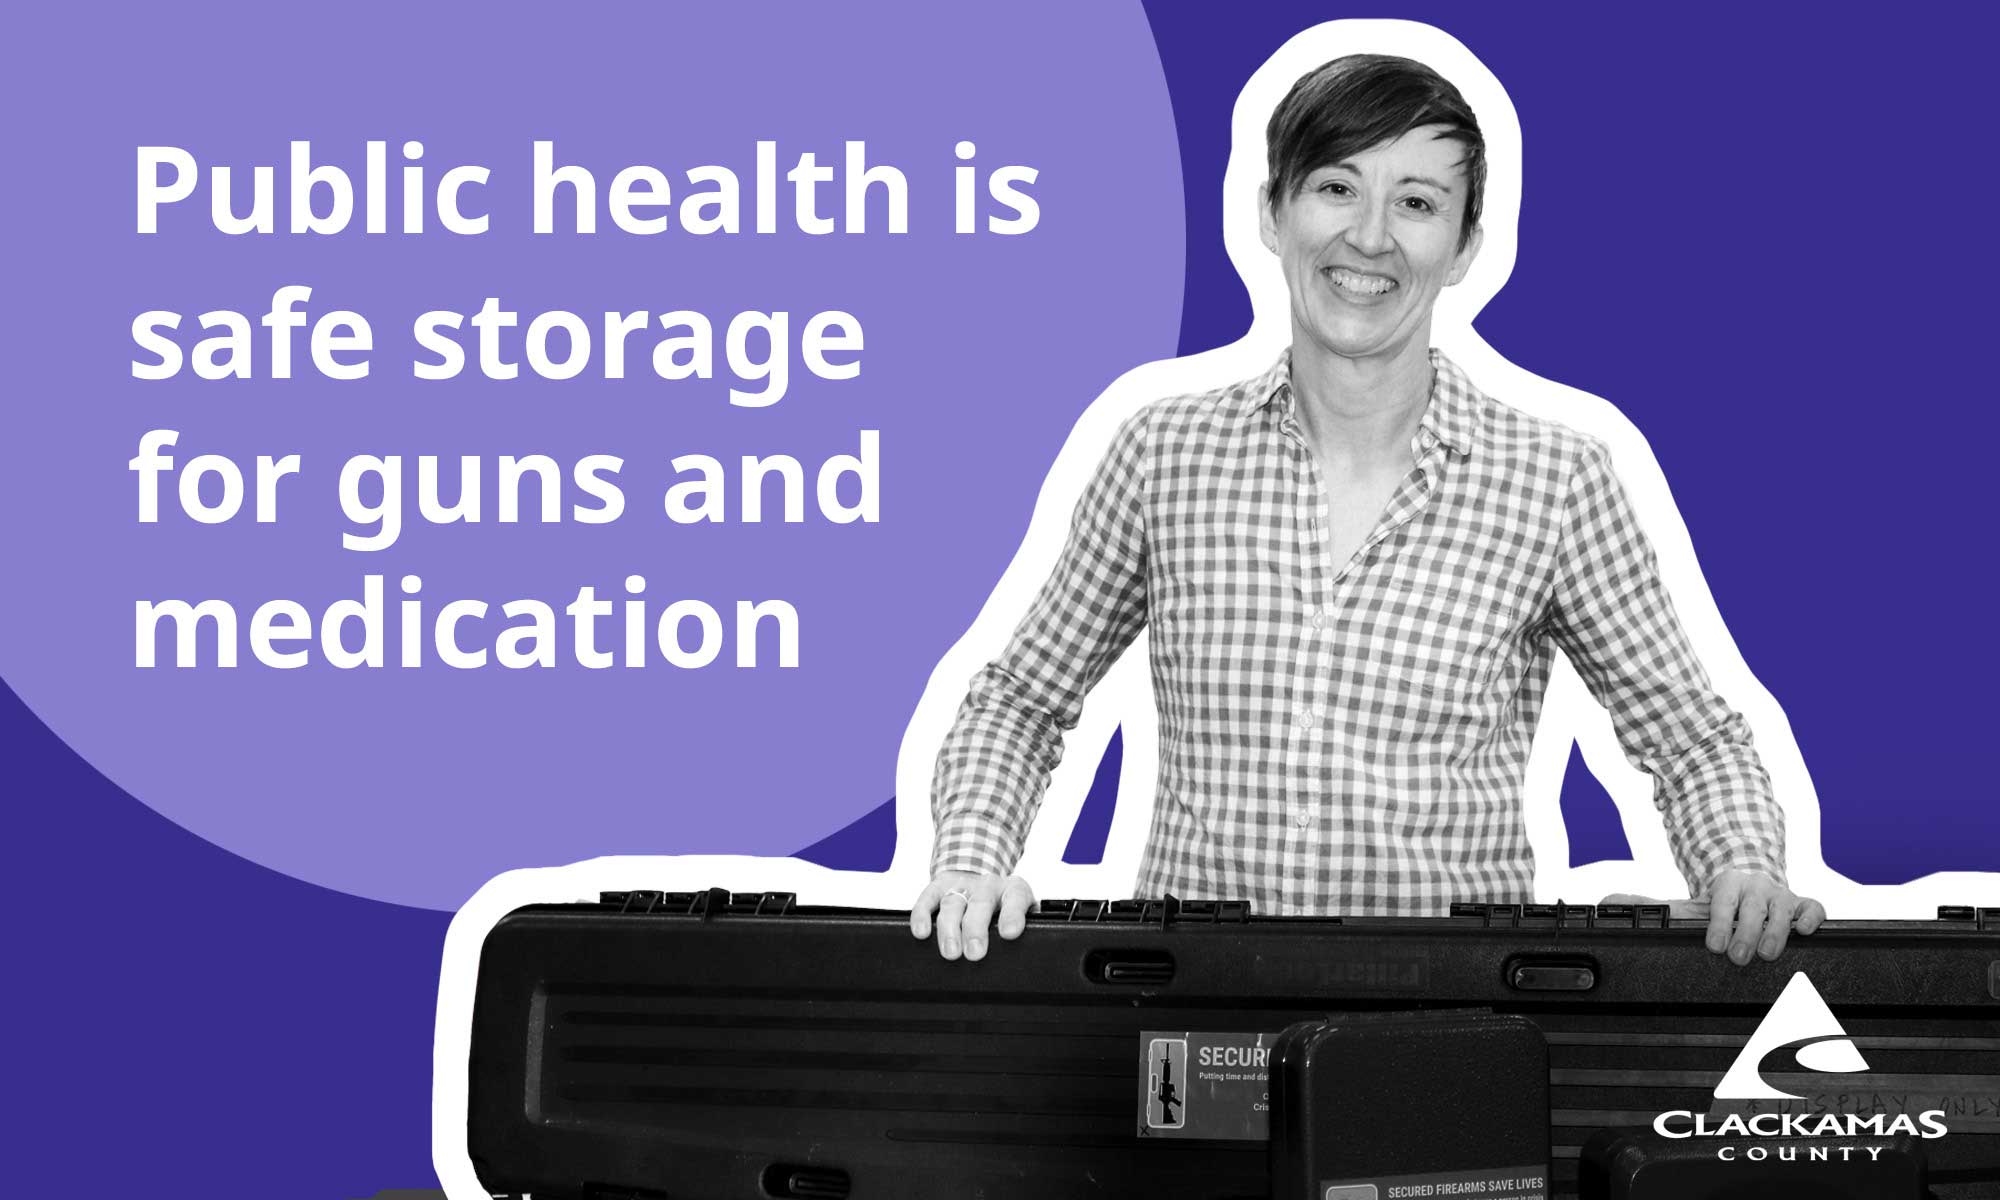 Public health is safe storage for guns and medication